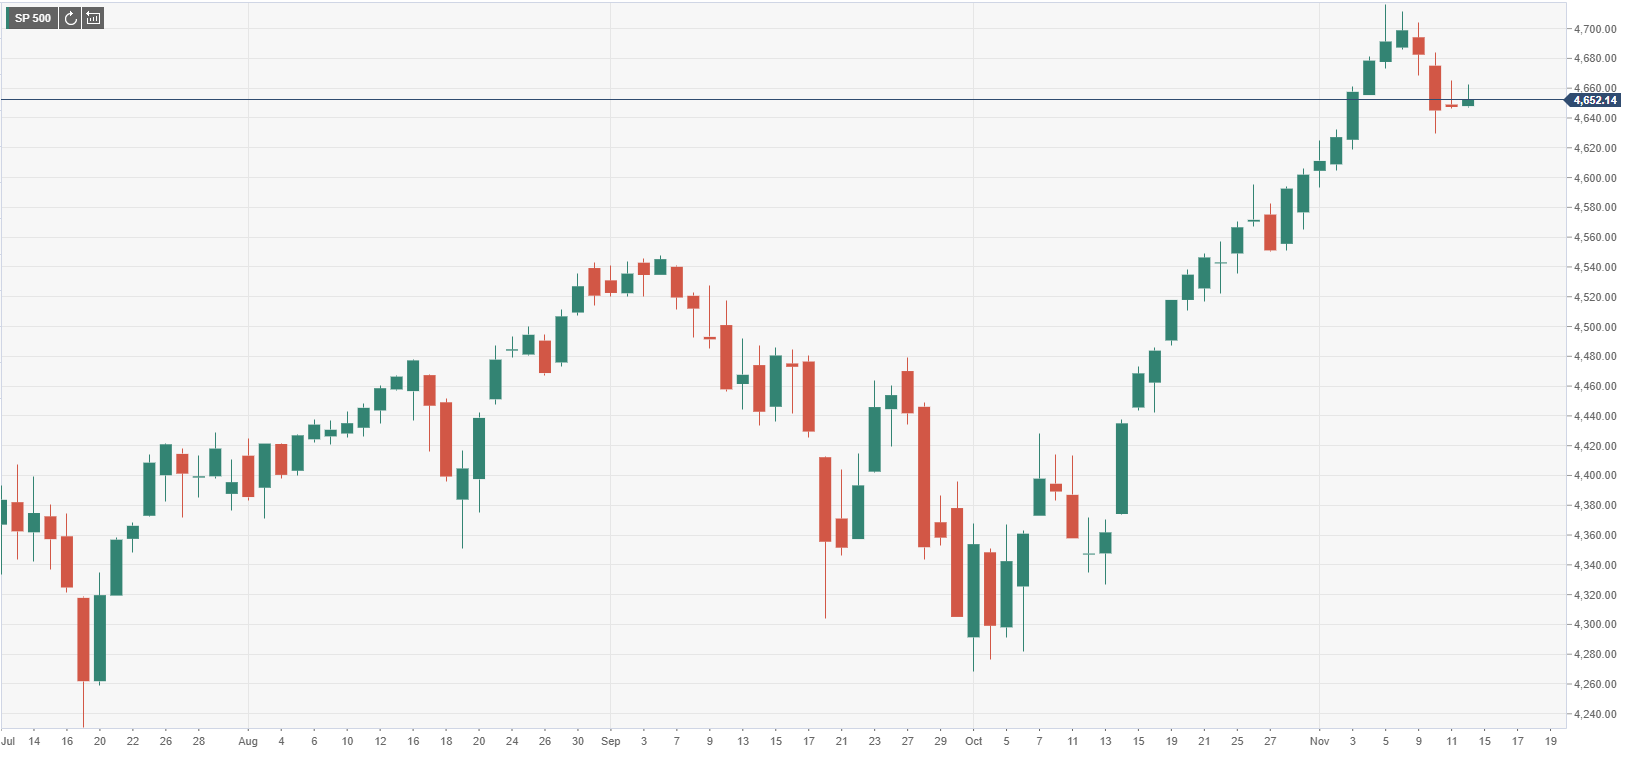 S&P 500 Index Opens Modestly Higher Awaiting US Consumer Sentiment Data